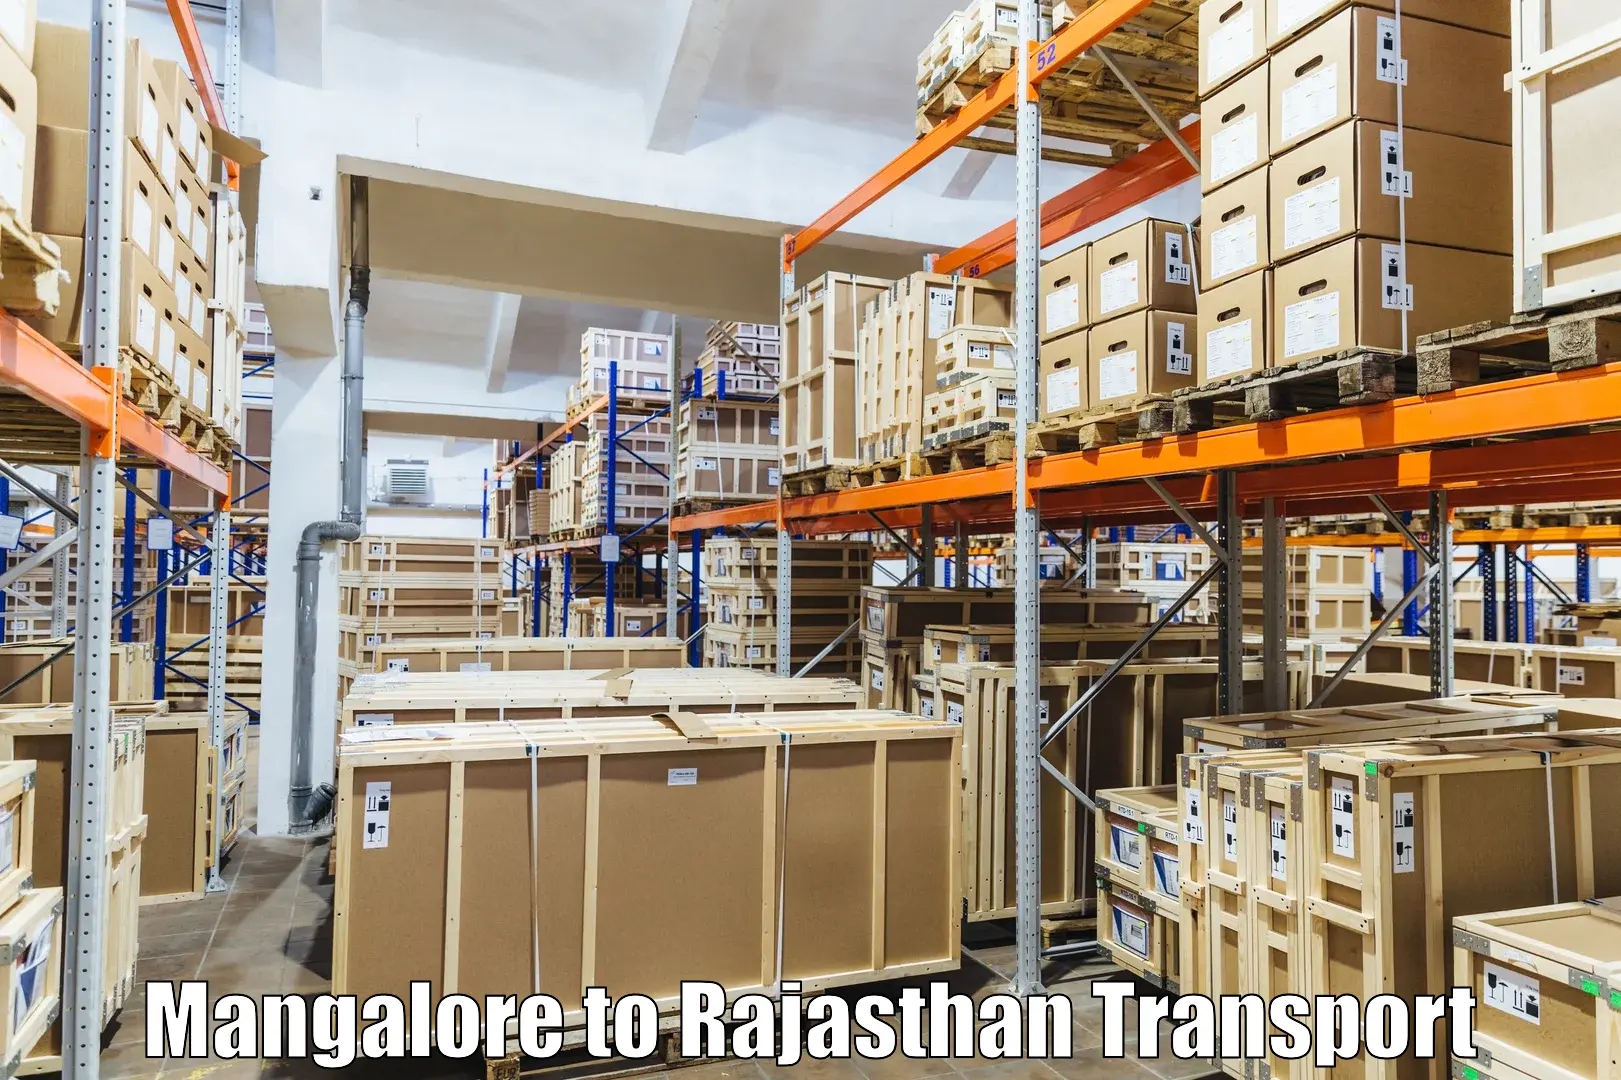 Shipping partner Mangalore to Piparcity